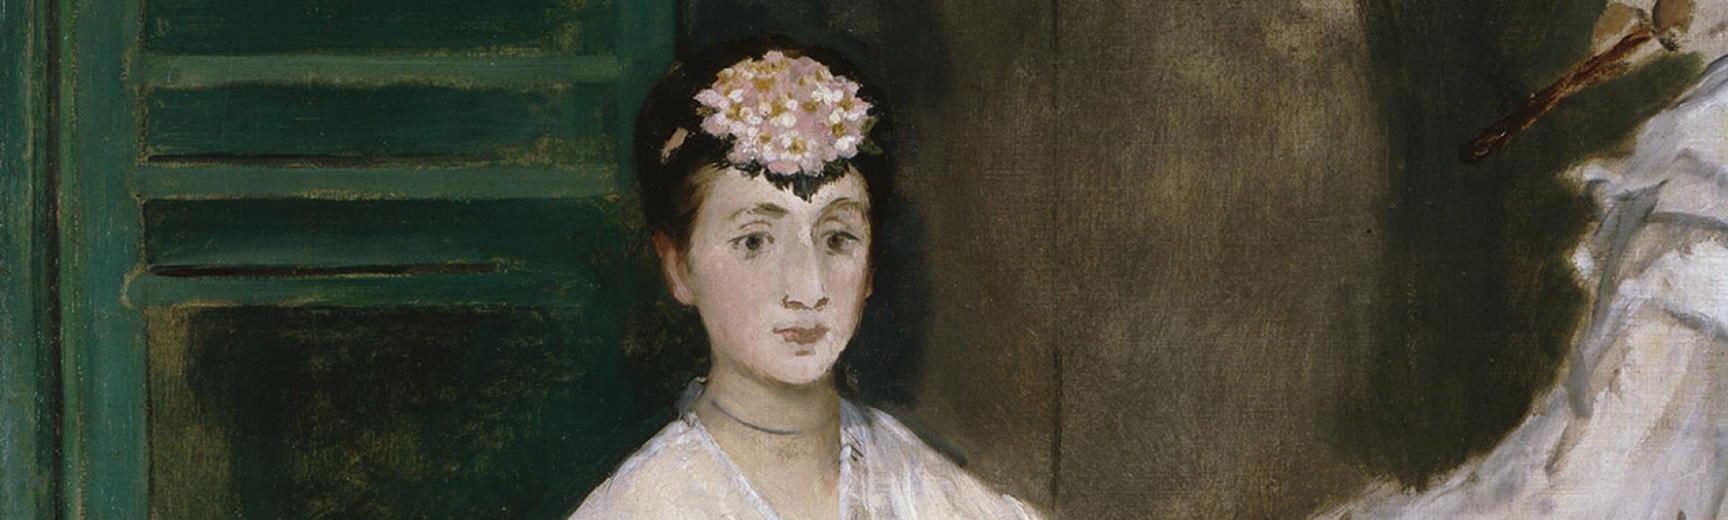 Detail from Manet's Portrait of Mademoiselle Claus